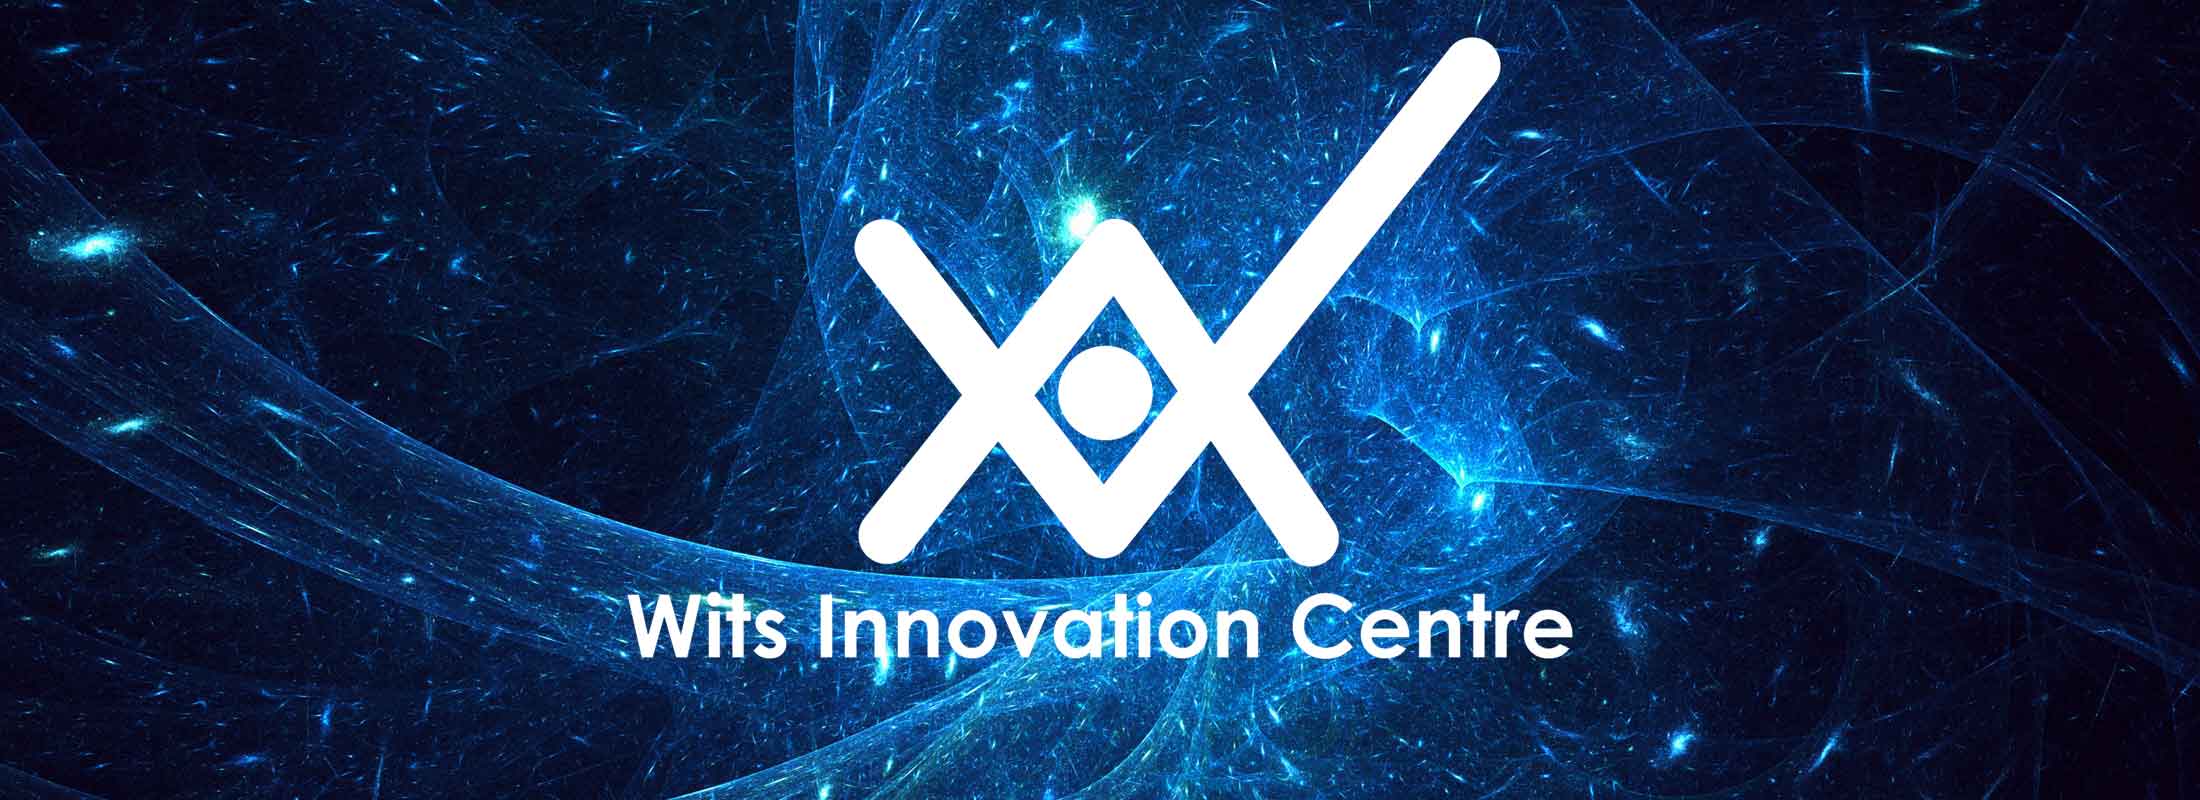 Wits Innovation Centre (WIC)